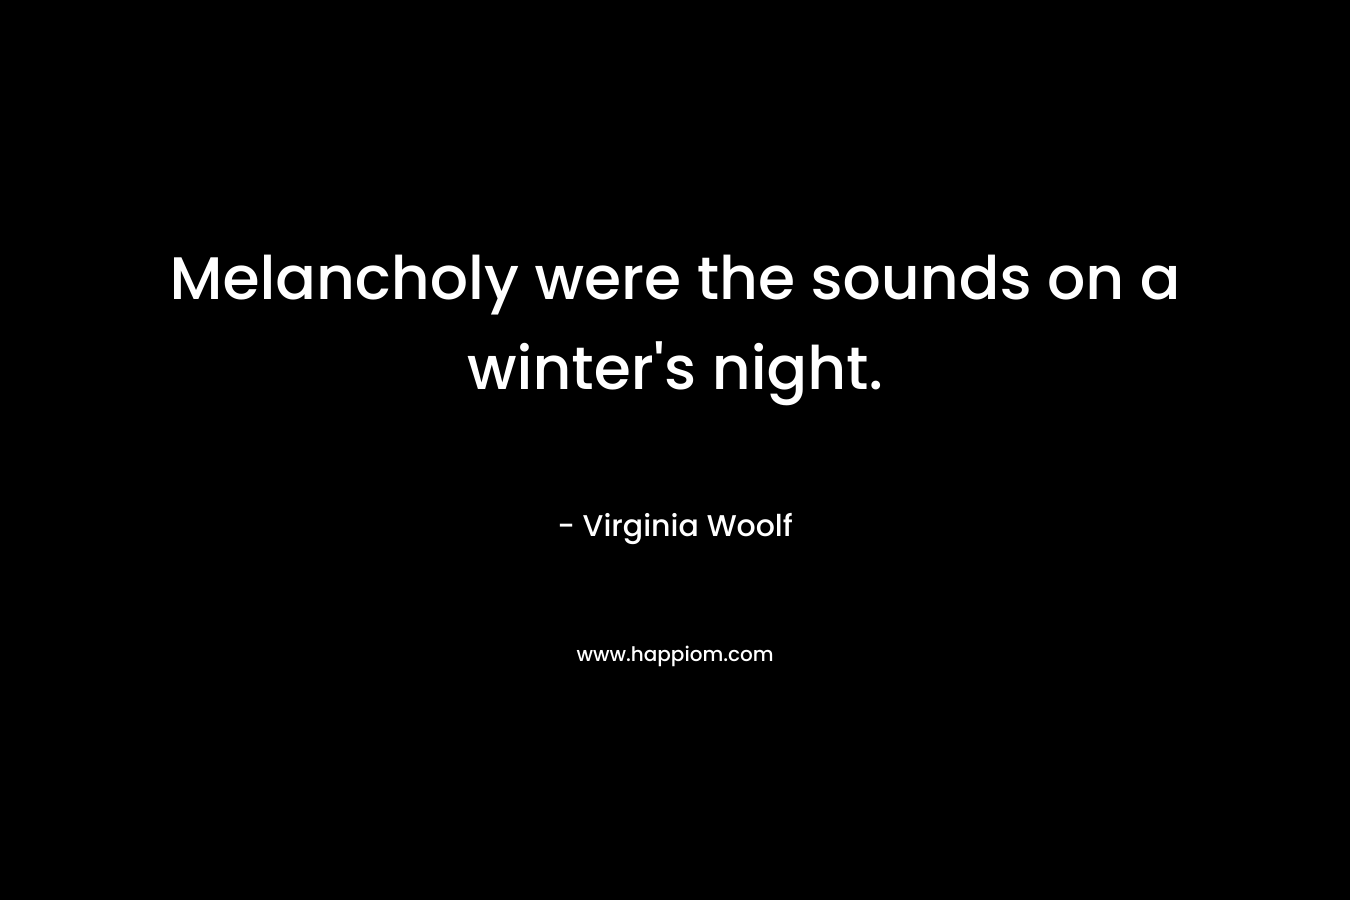 Melancholy were the sounds on a winter’s night. – Virginia Woolf